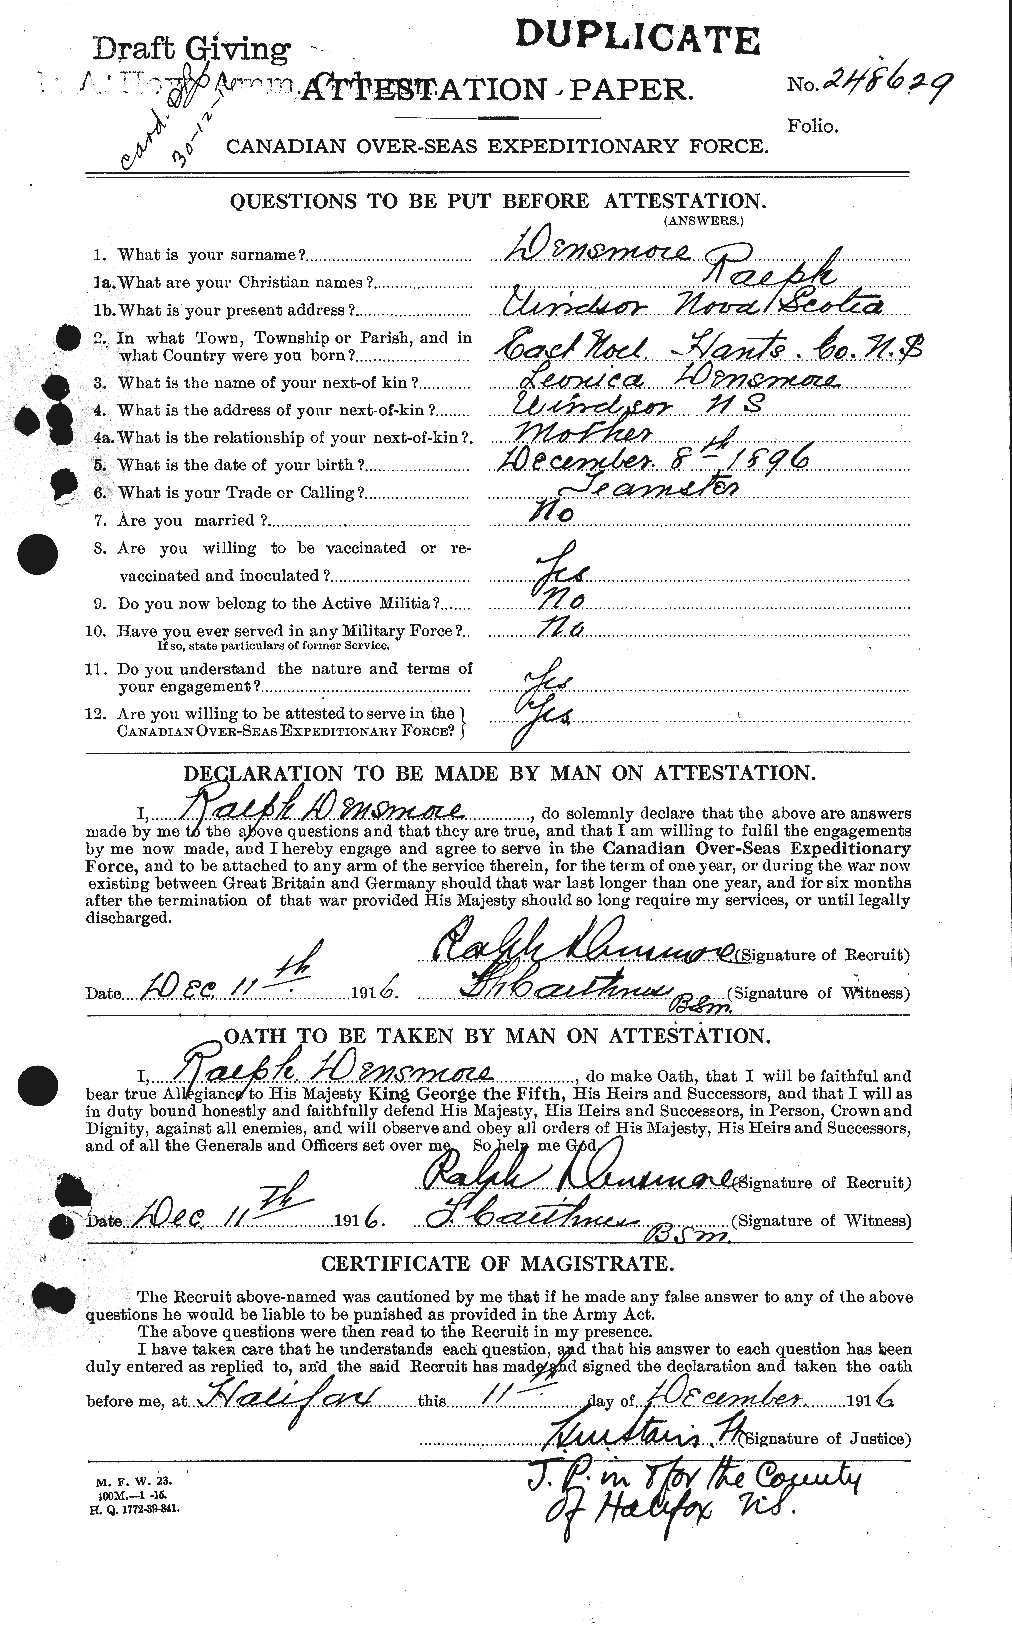 Personnel Records of the First World War - CEF 286438a